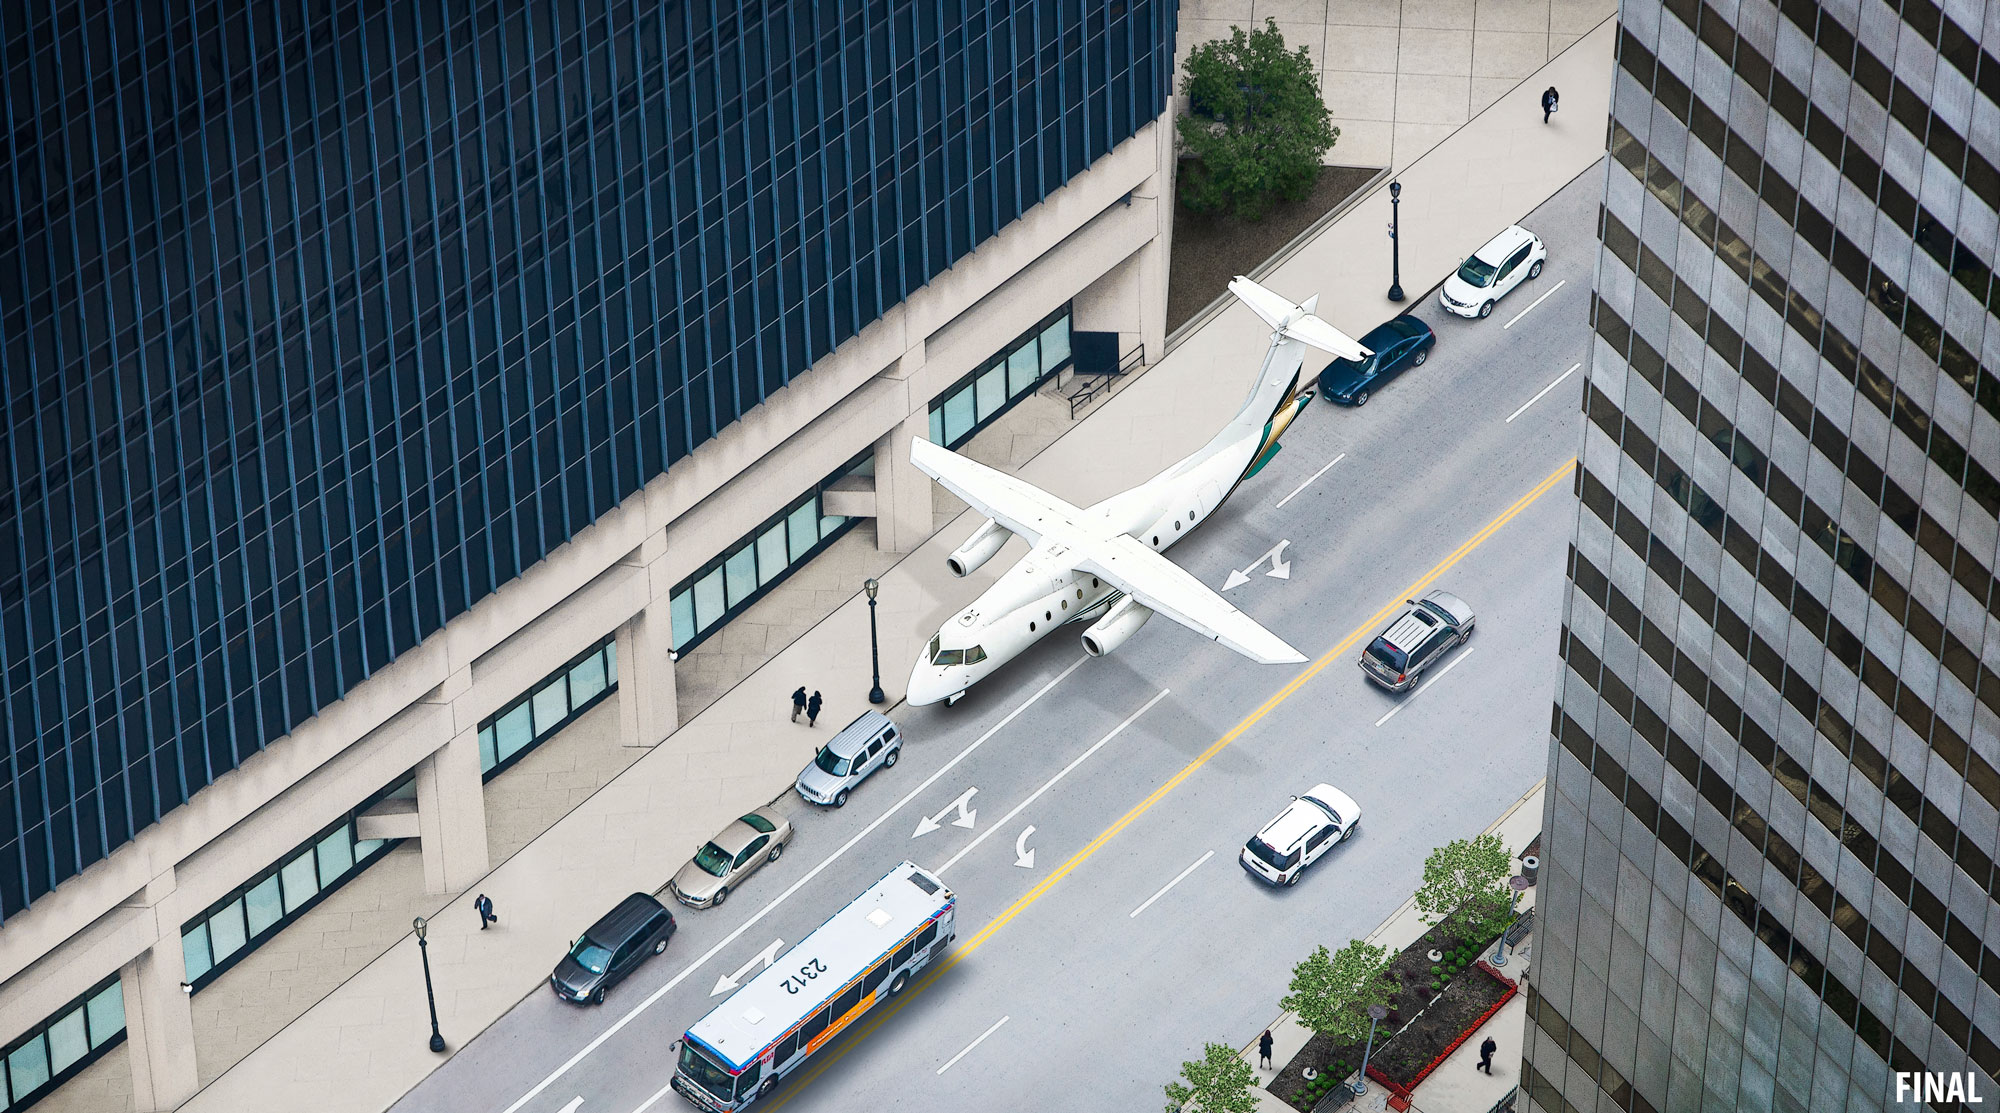 Airplane parked like a car on the street